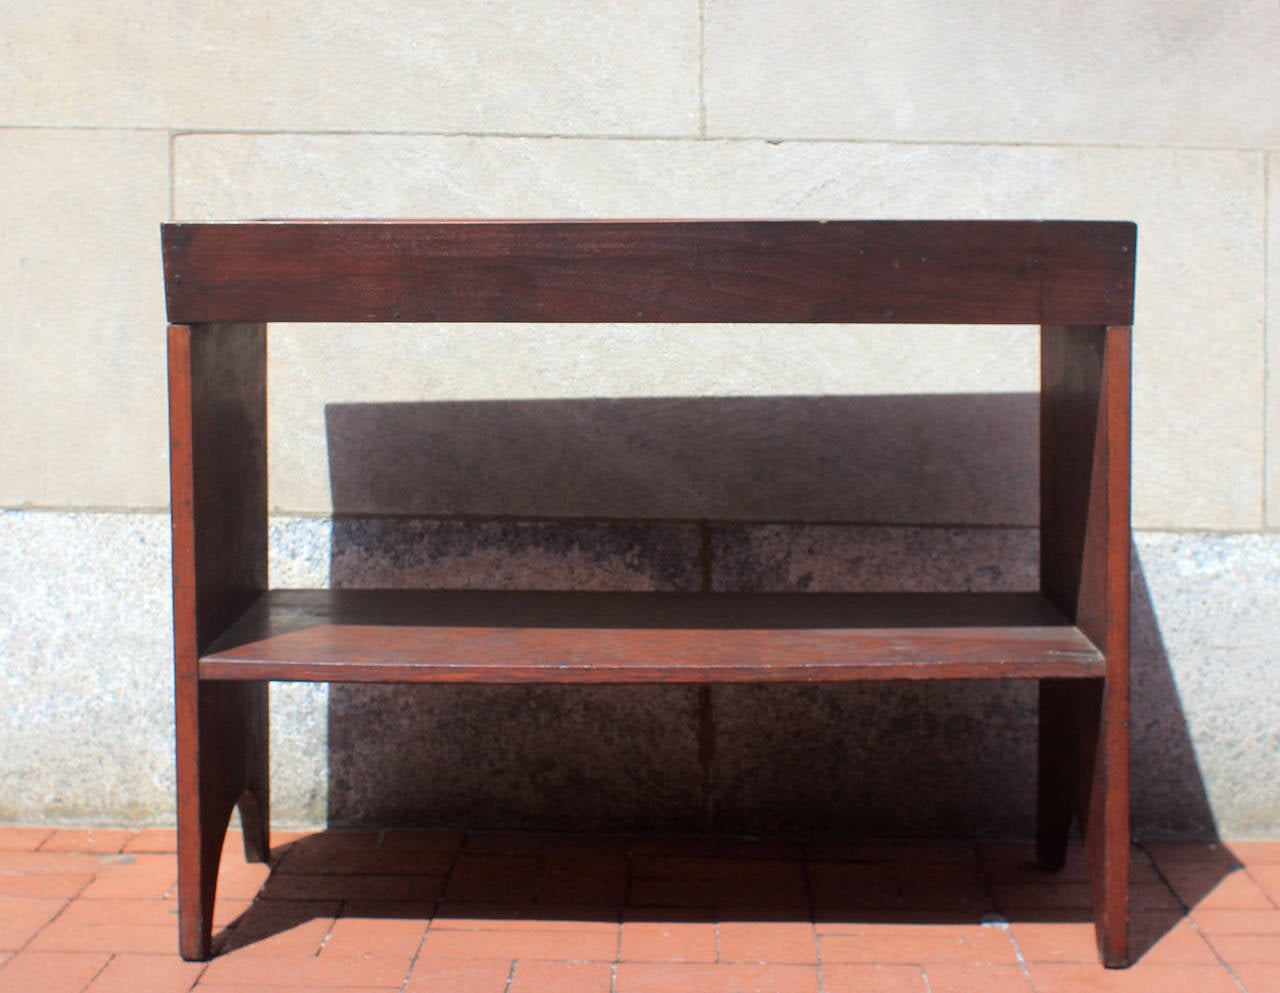 Very well-constructed and unusual walnut bucket bench would make an excellent, small dry sink. Mortise and tenon construction with canted sides, nice form, American, circa 1850. Very good patina and finish.